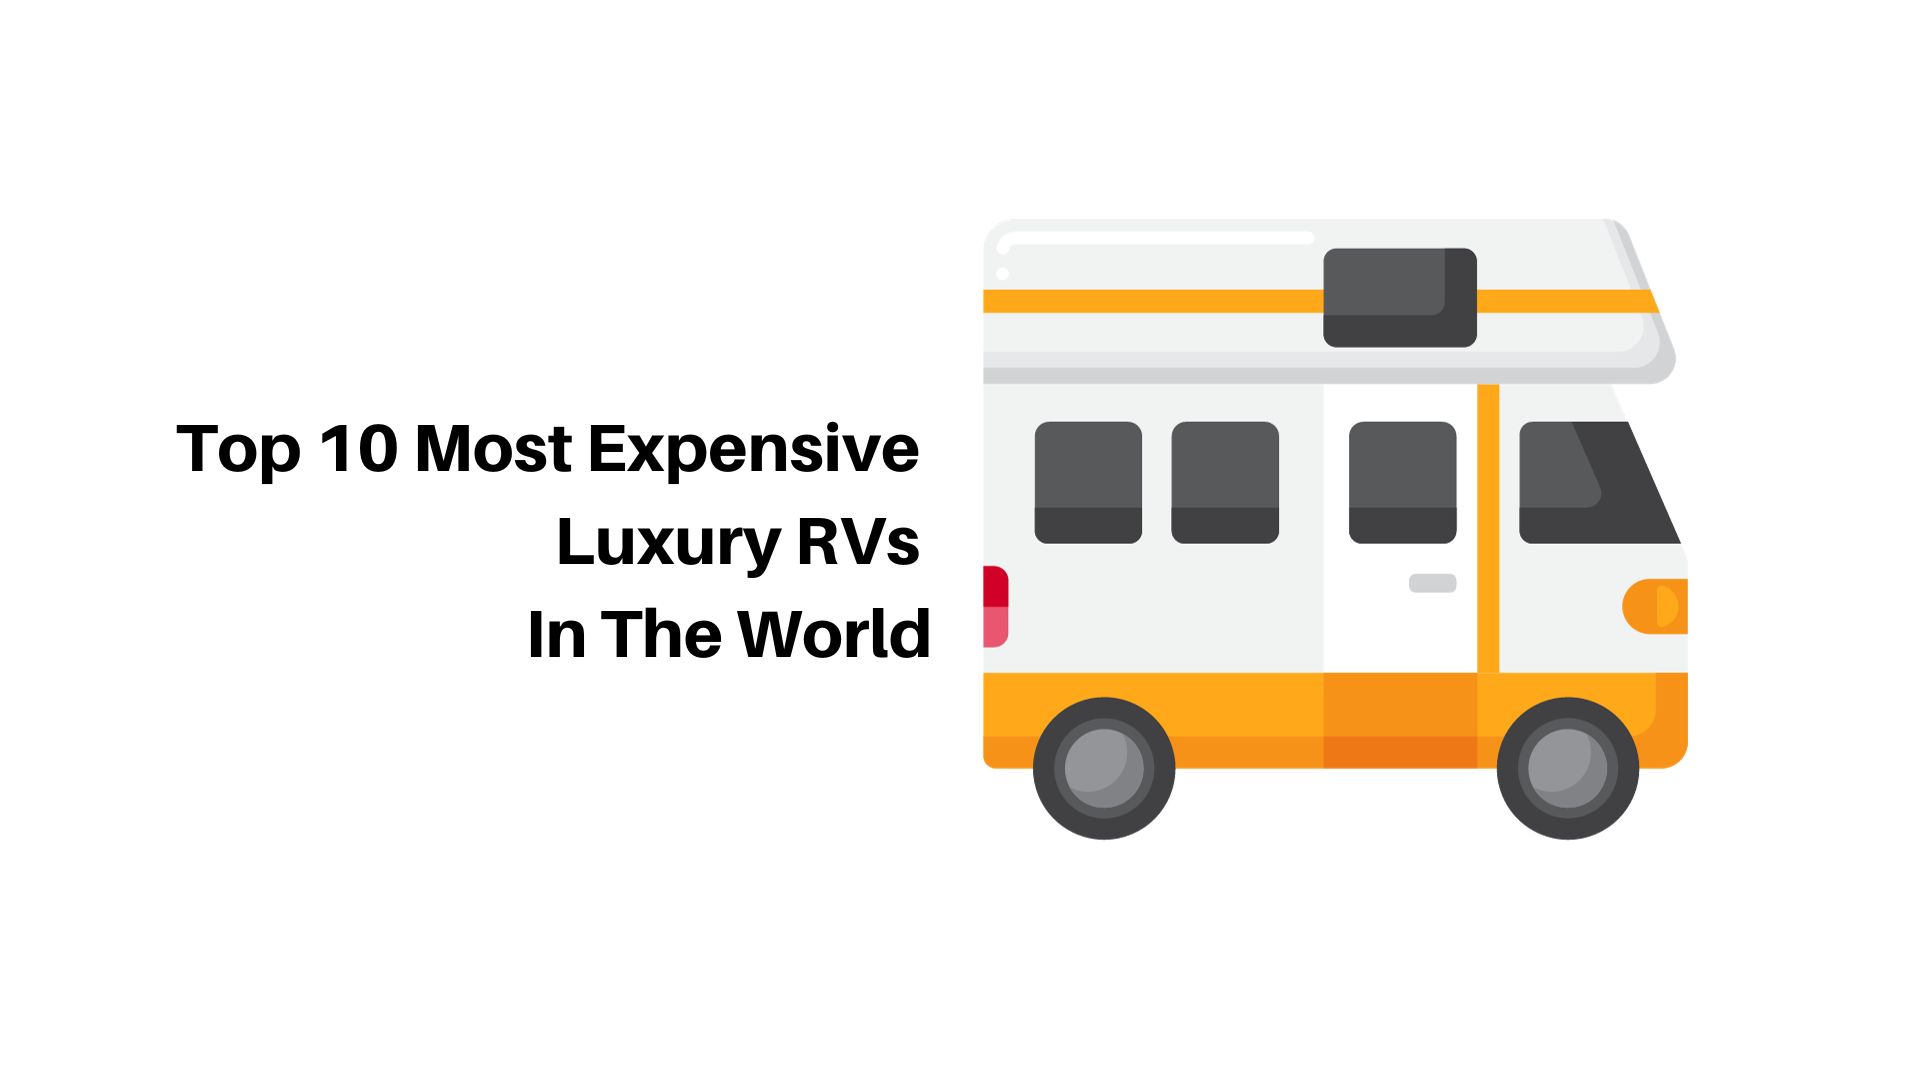 Top 10 Most Expensive Luxury RVs In The World